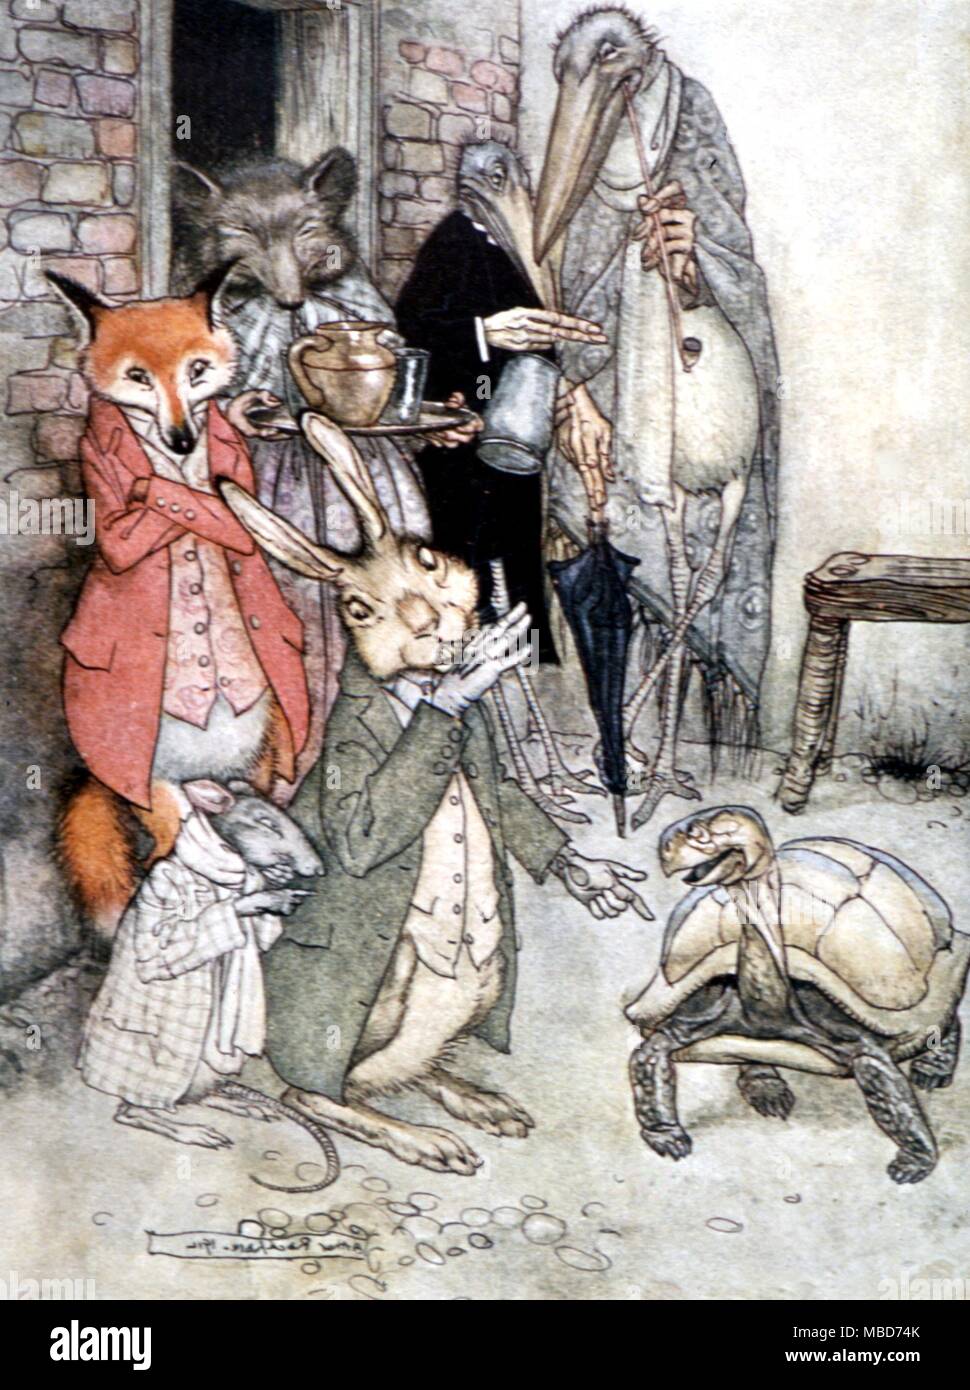 Fairy Tales - Hare and Tortoise - Illustration by Arthur Rackham of the story of the Hare and the Tortoise, from Aesop's Fables, 1908 Stock Photo